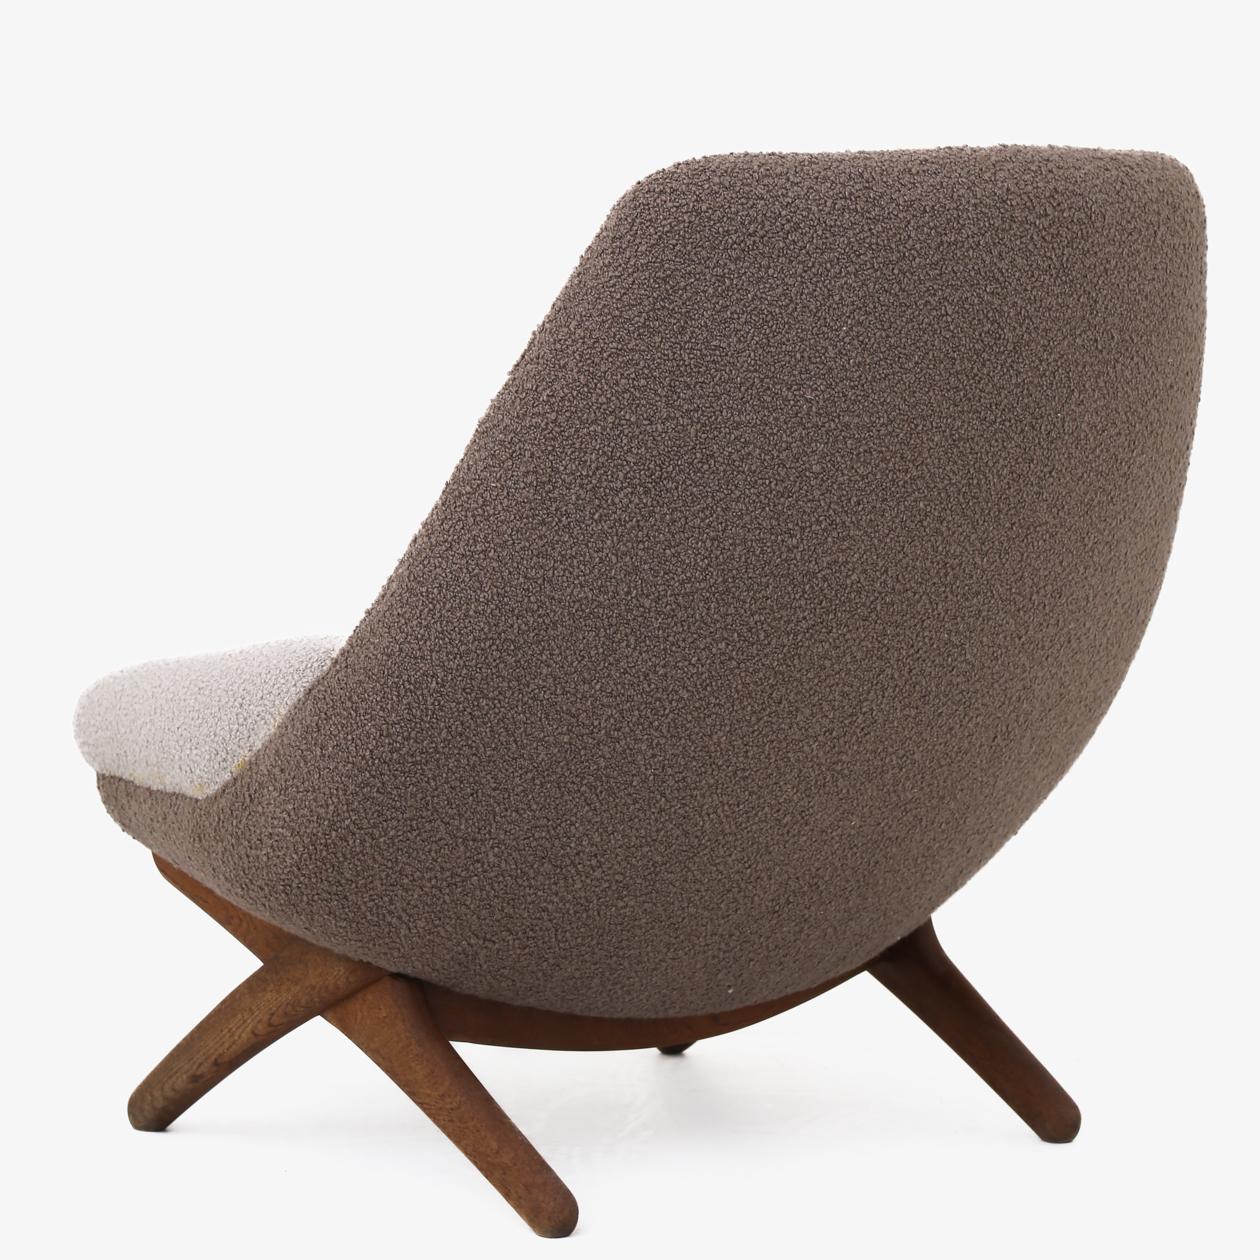 ML 91 - Reupholstered easy chair in new textile (Elle from Kvadrat, code 0220 and 0280 respectively) with legs in patinated oak. Illum Wikkelsø / Mikael Laursen.